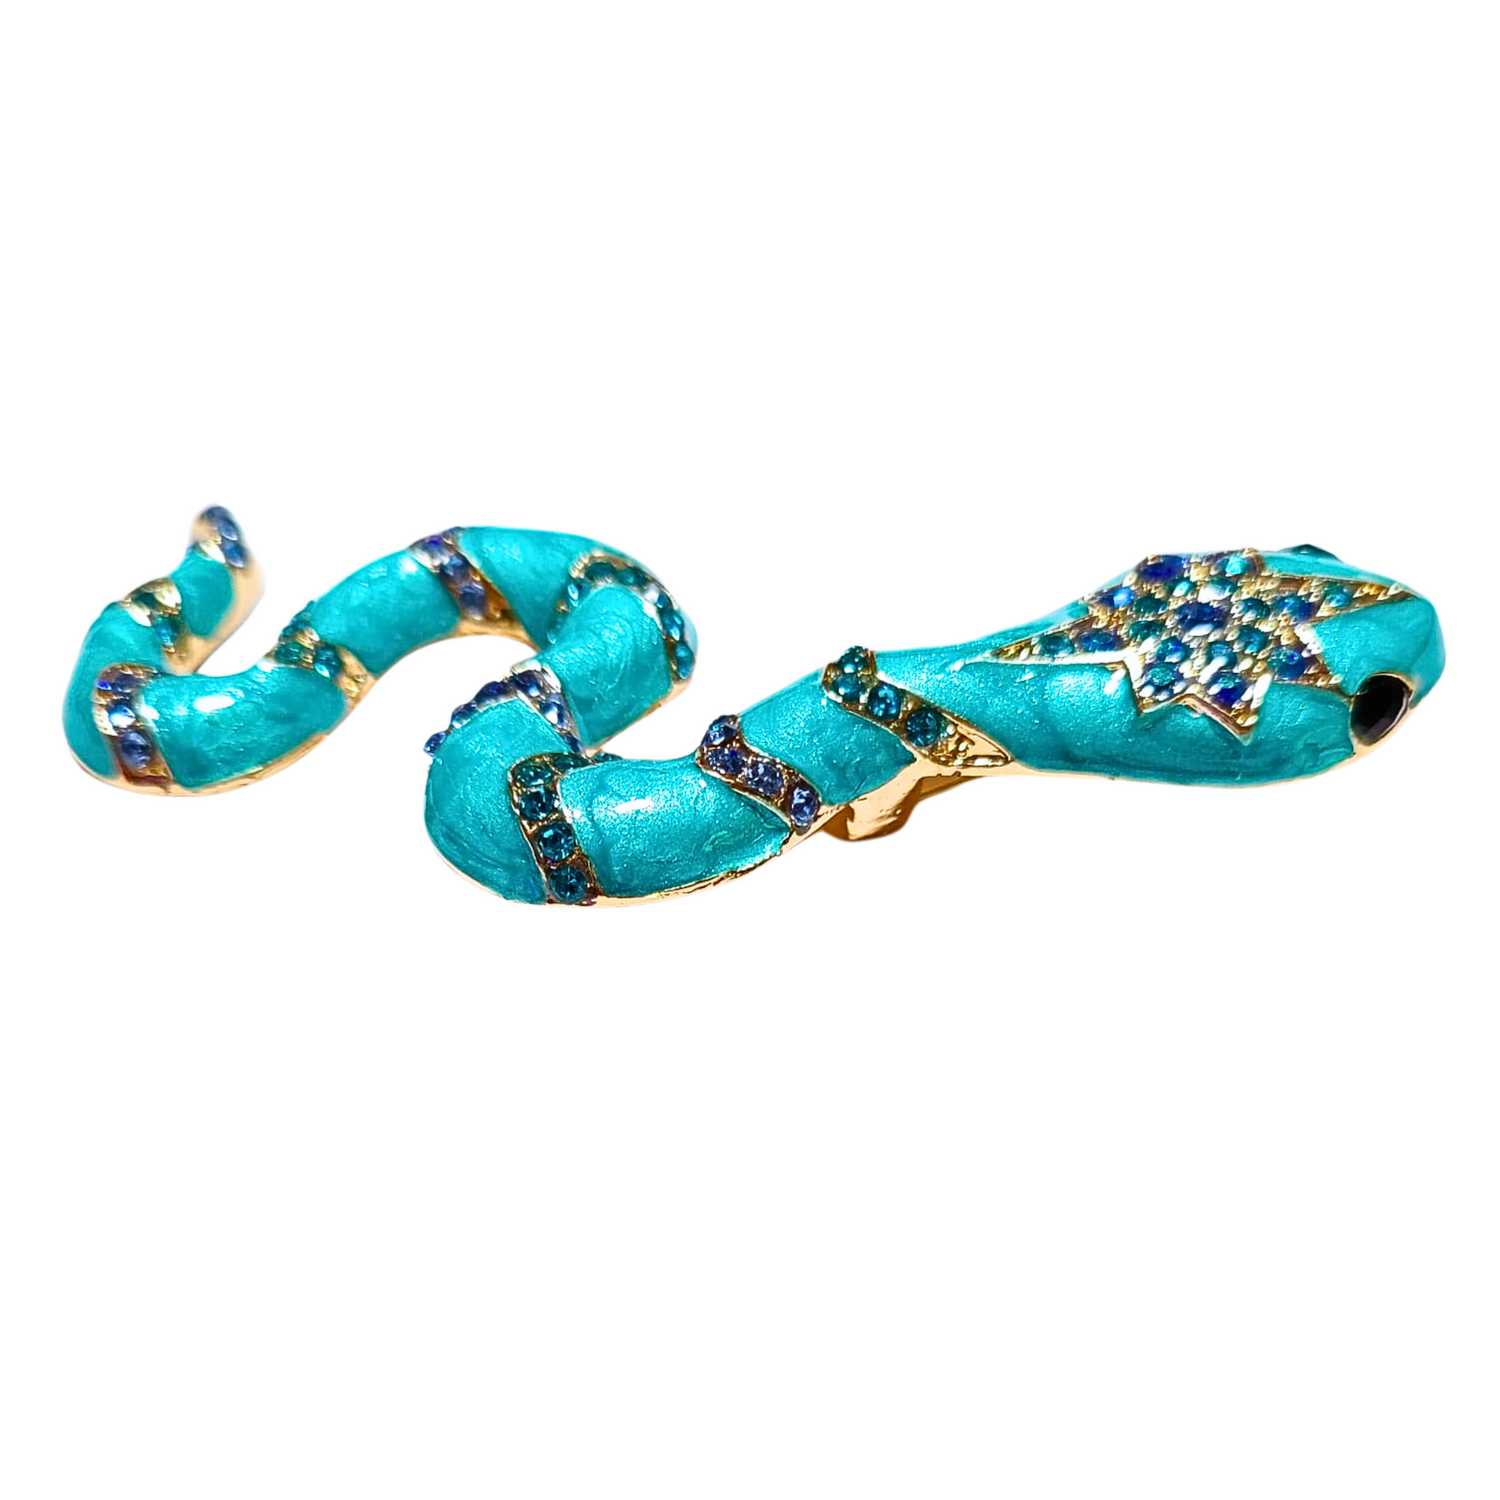 View 2: Teal Snake With Jewels Lapel Pin